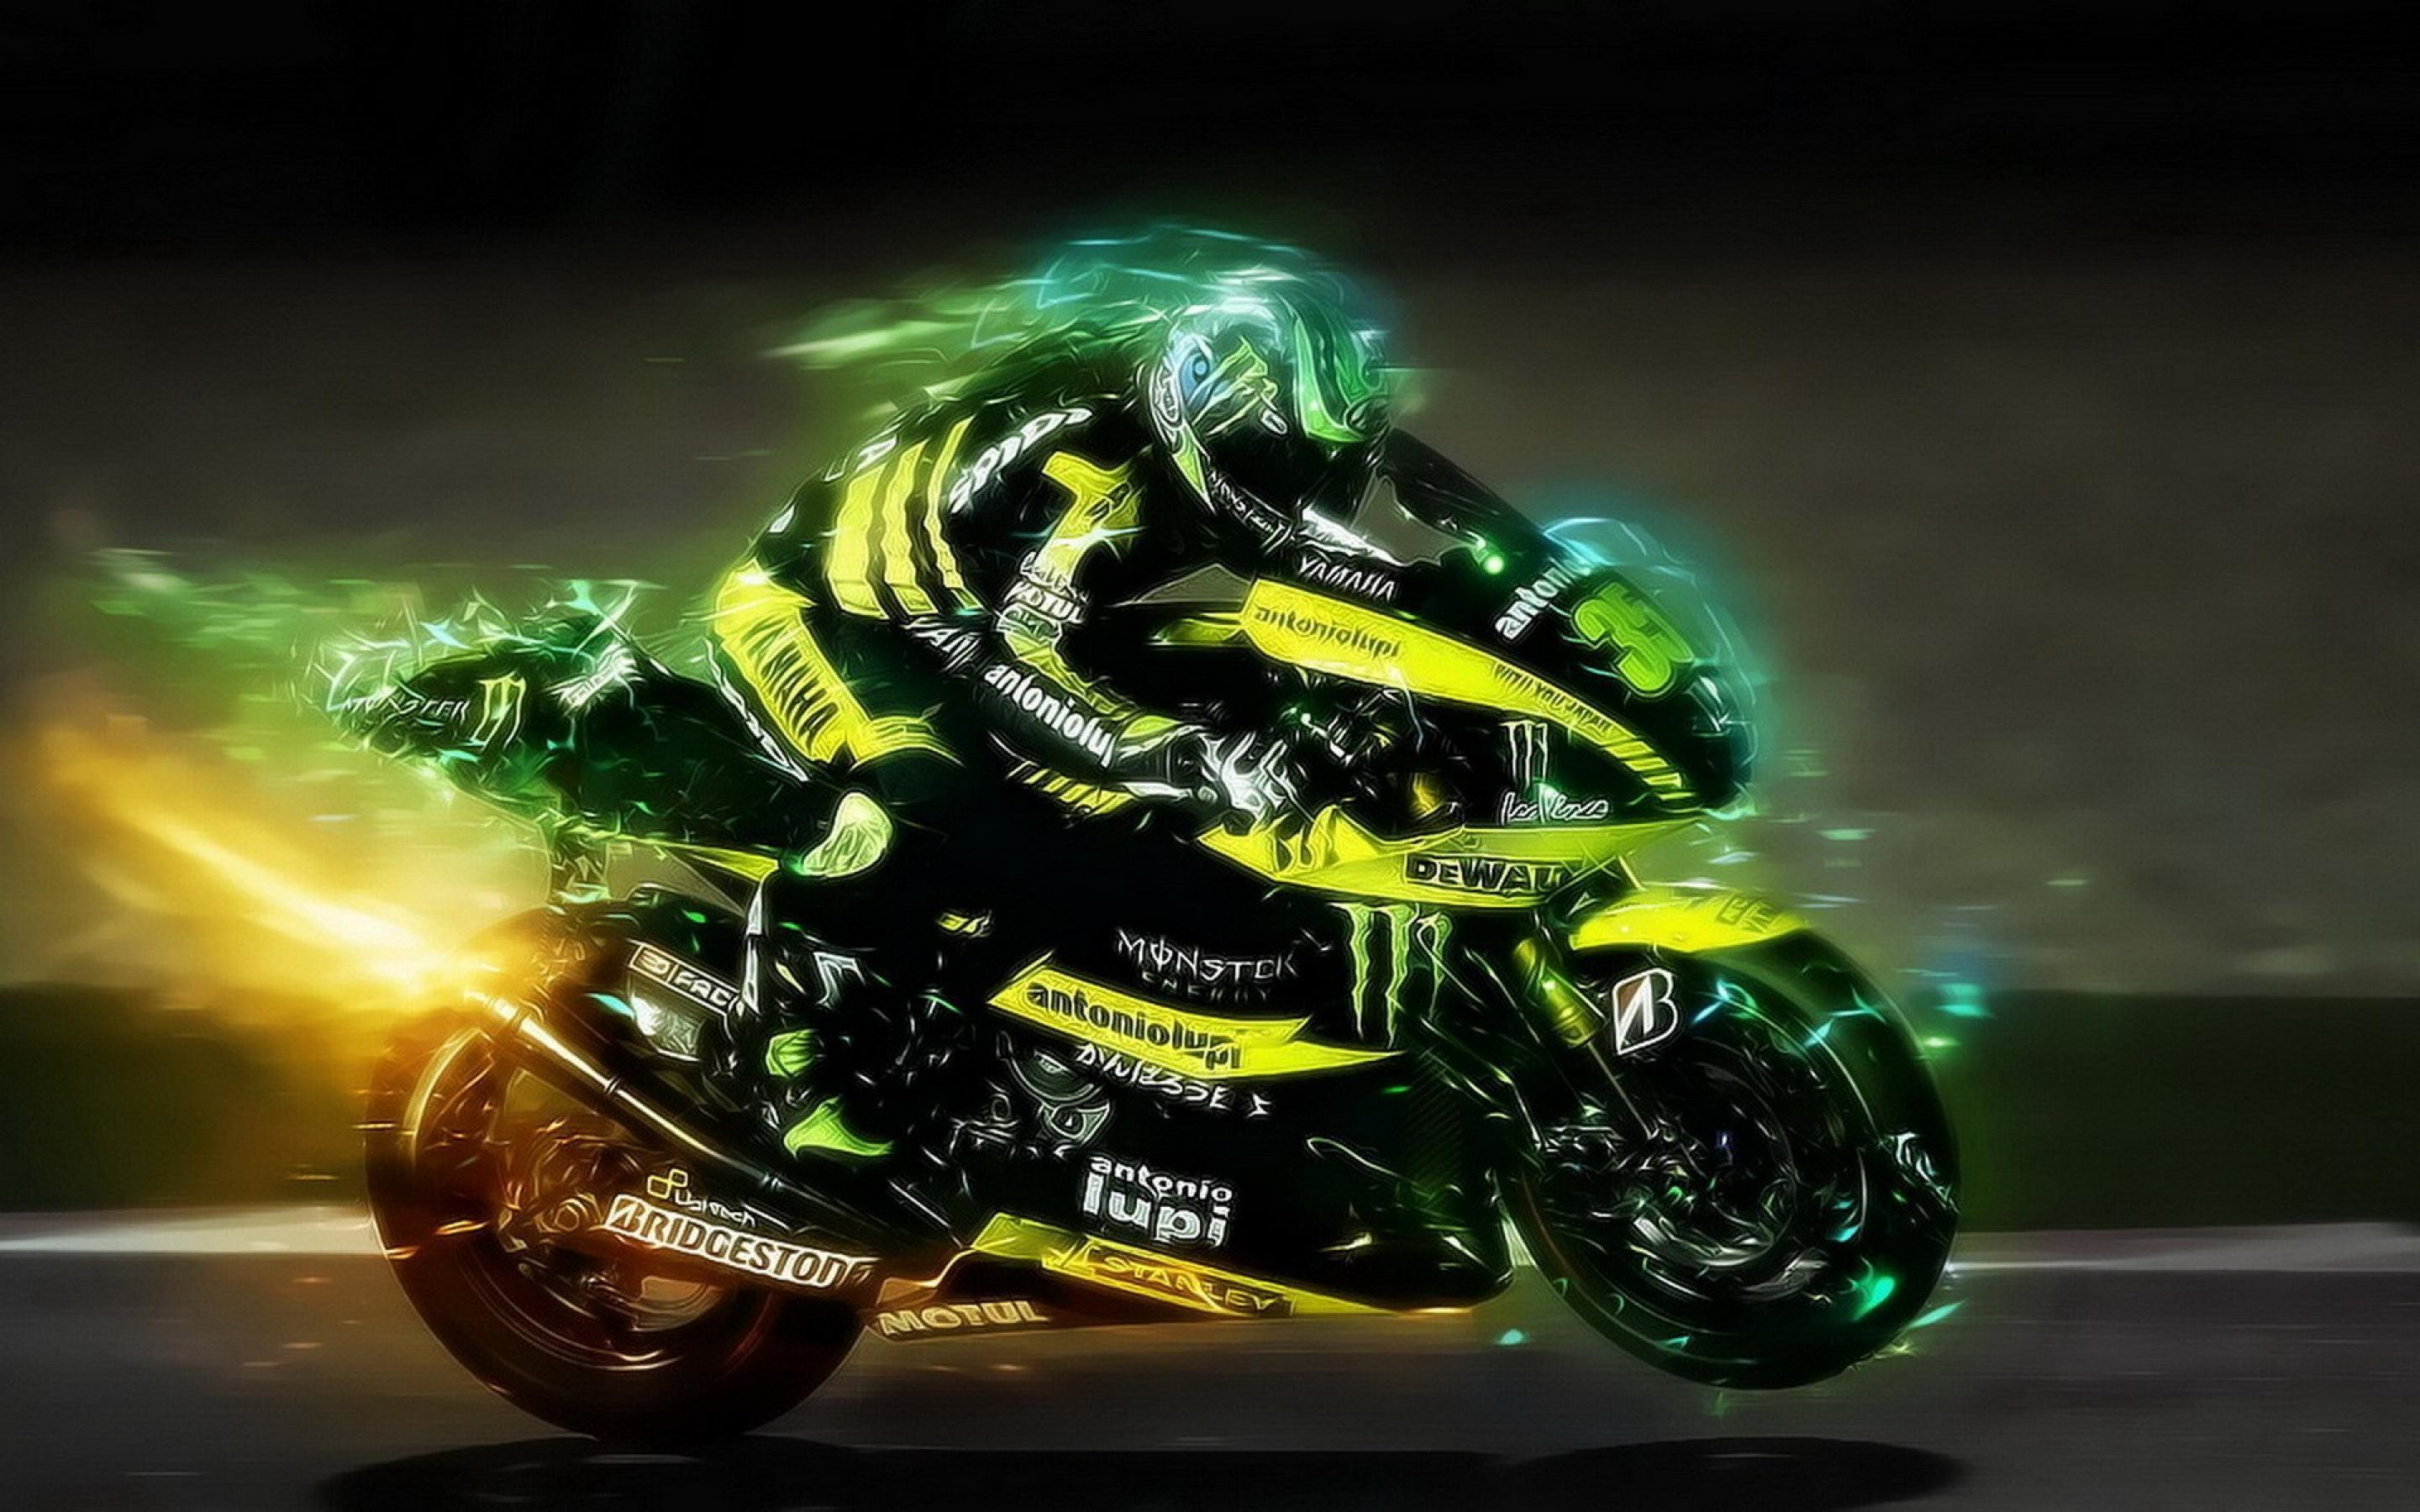 Nlc Motorcycle Wallpapers